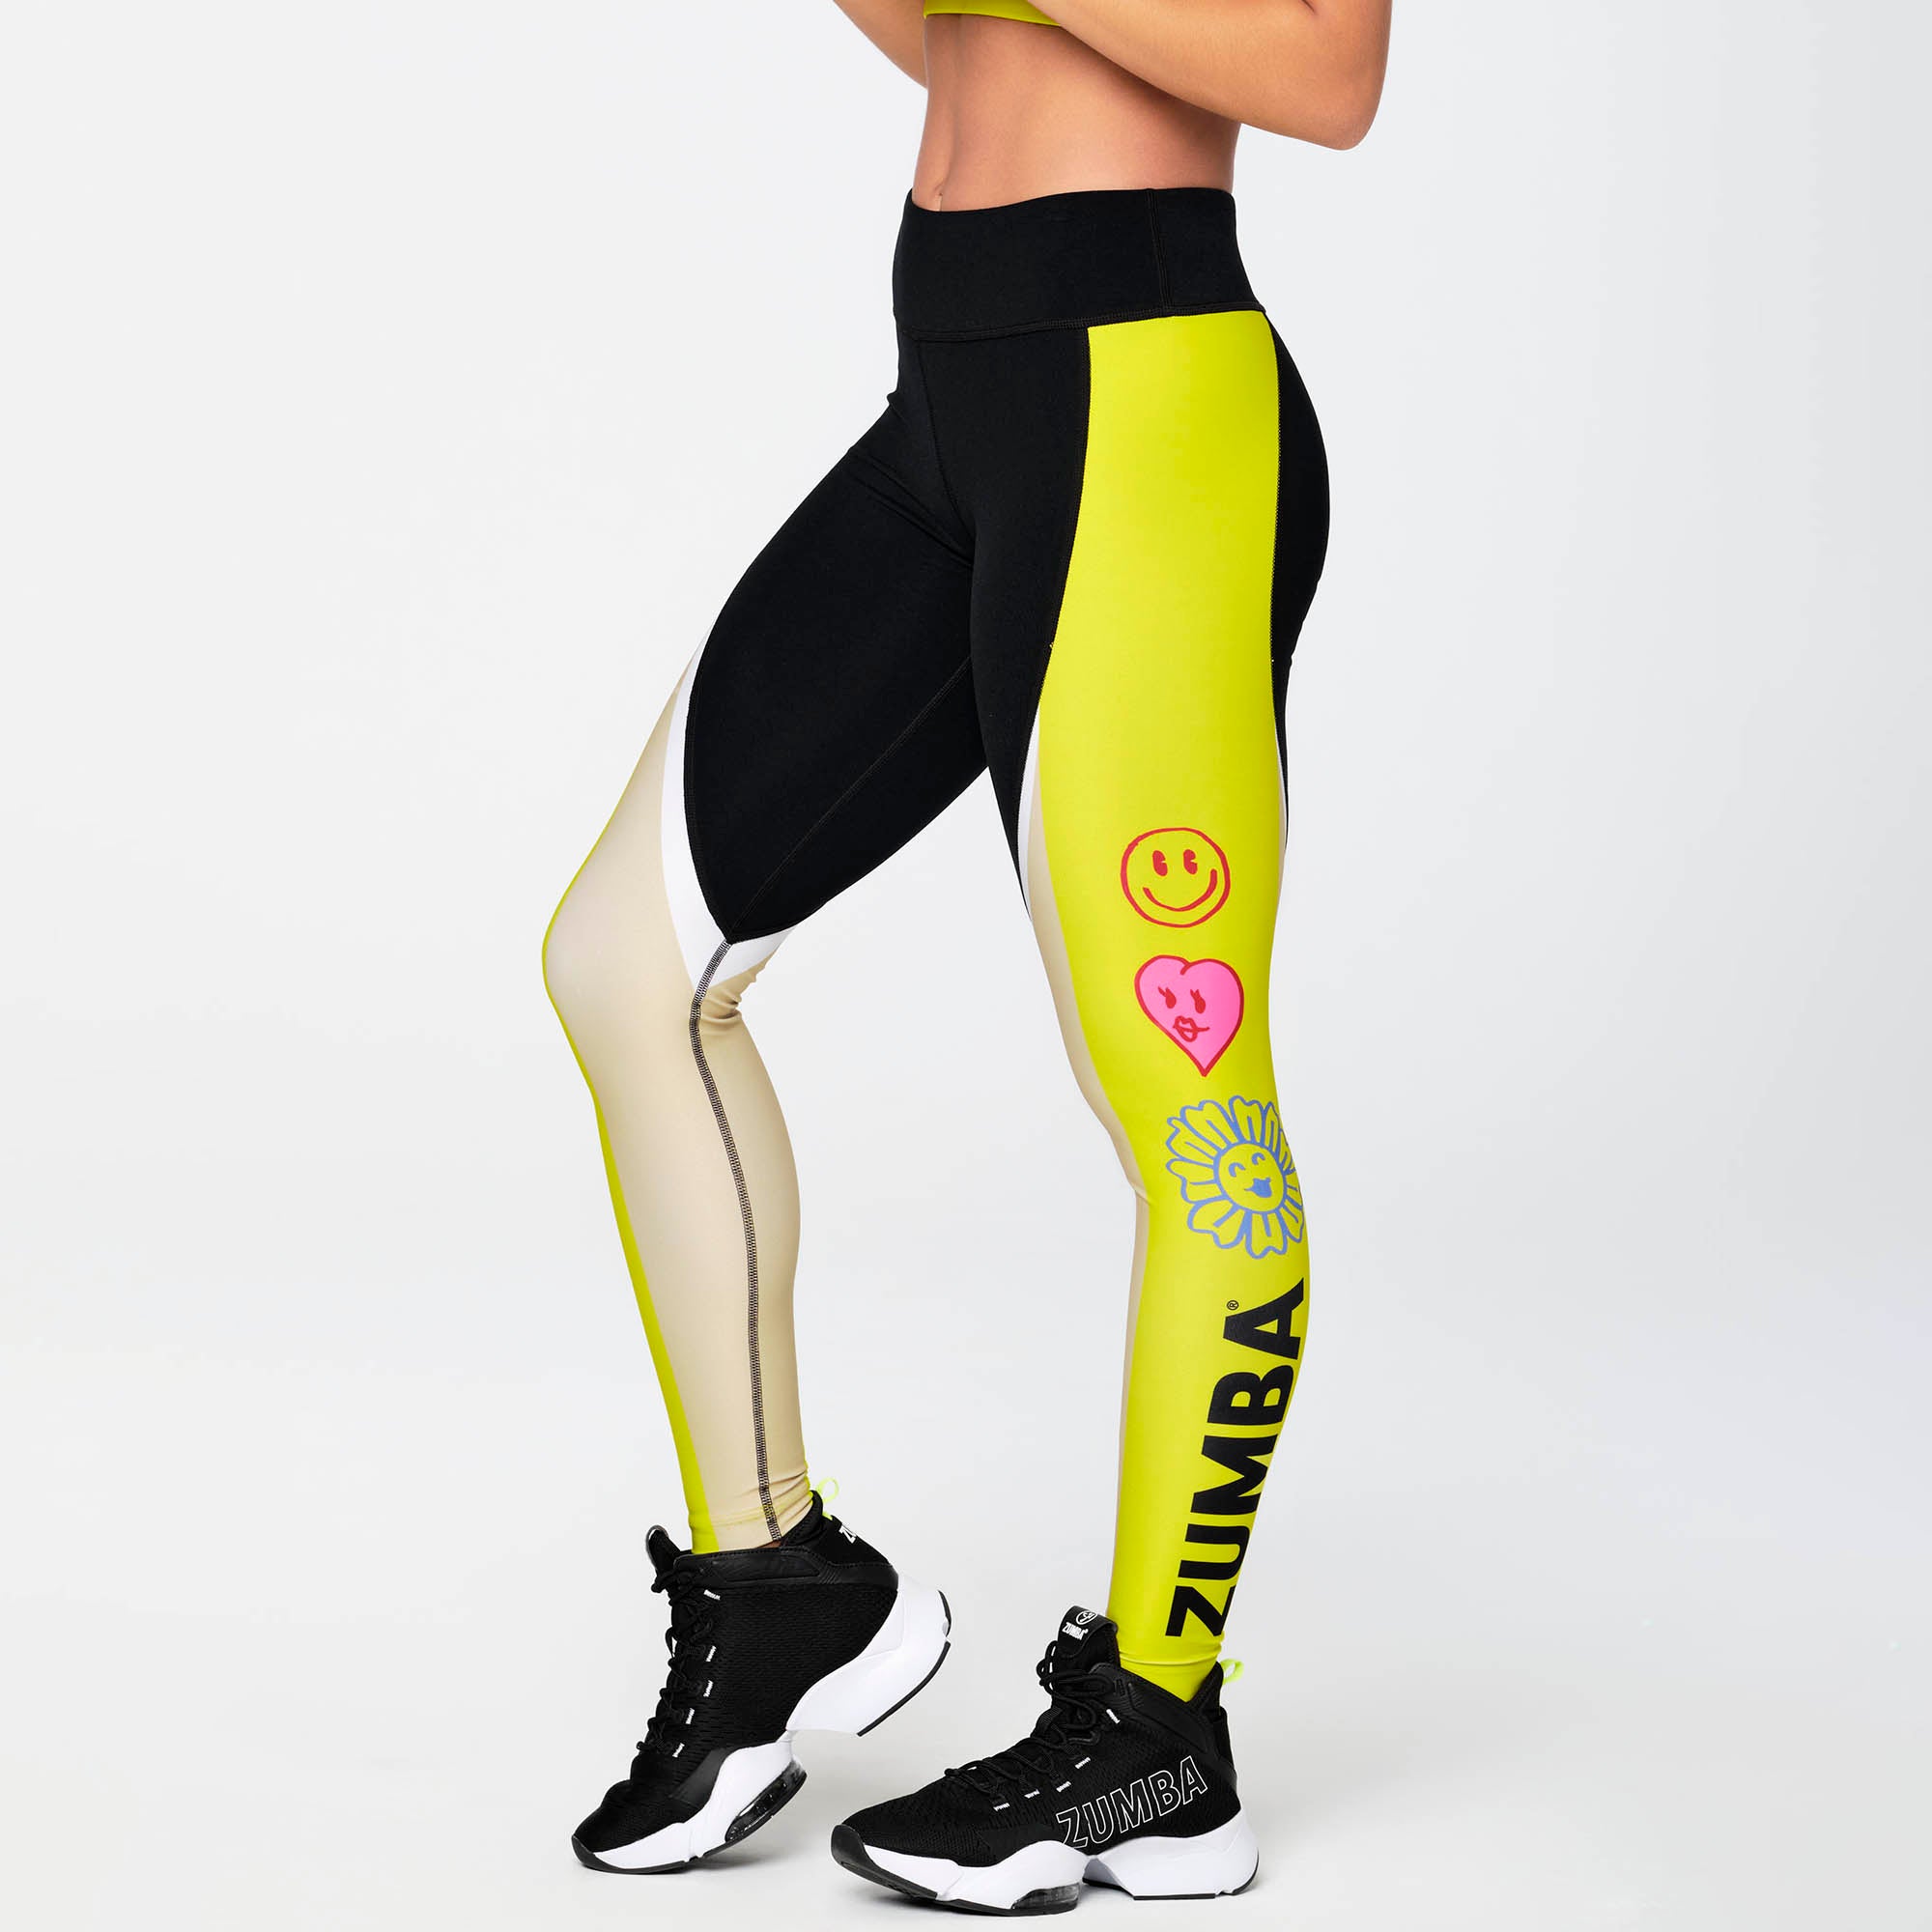 Shop the Stylish and Supportive Zumba Roller Derby High Waisted Leggings